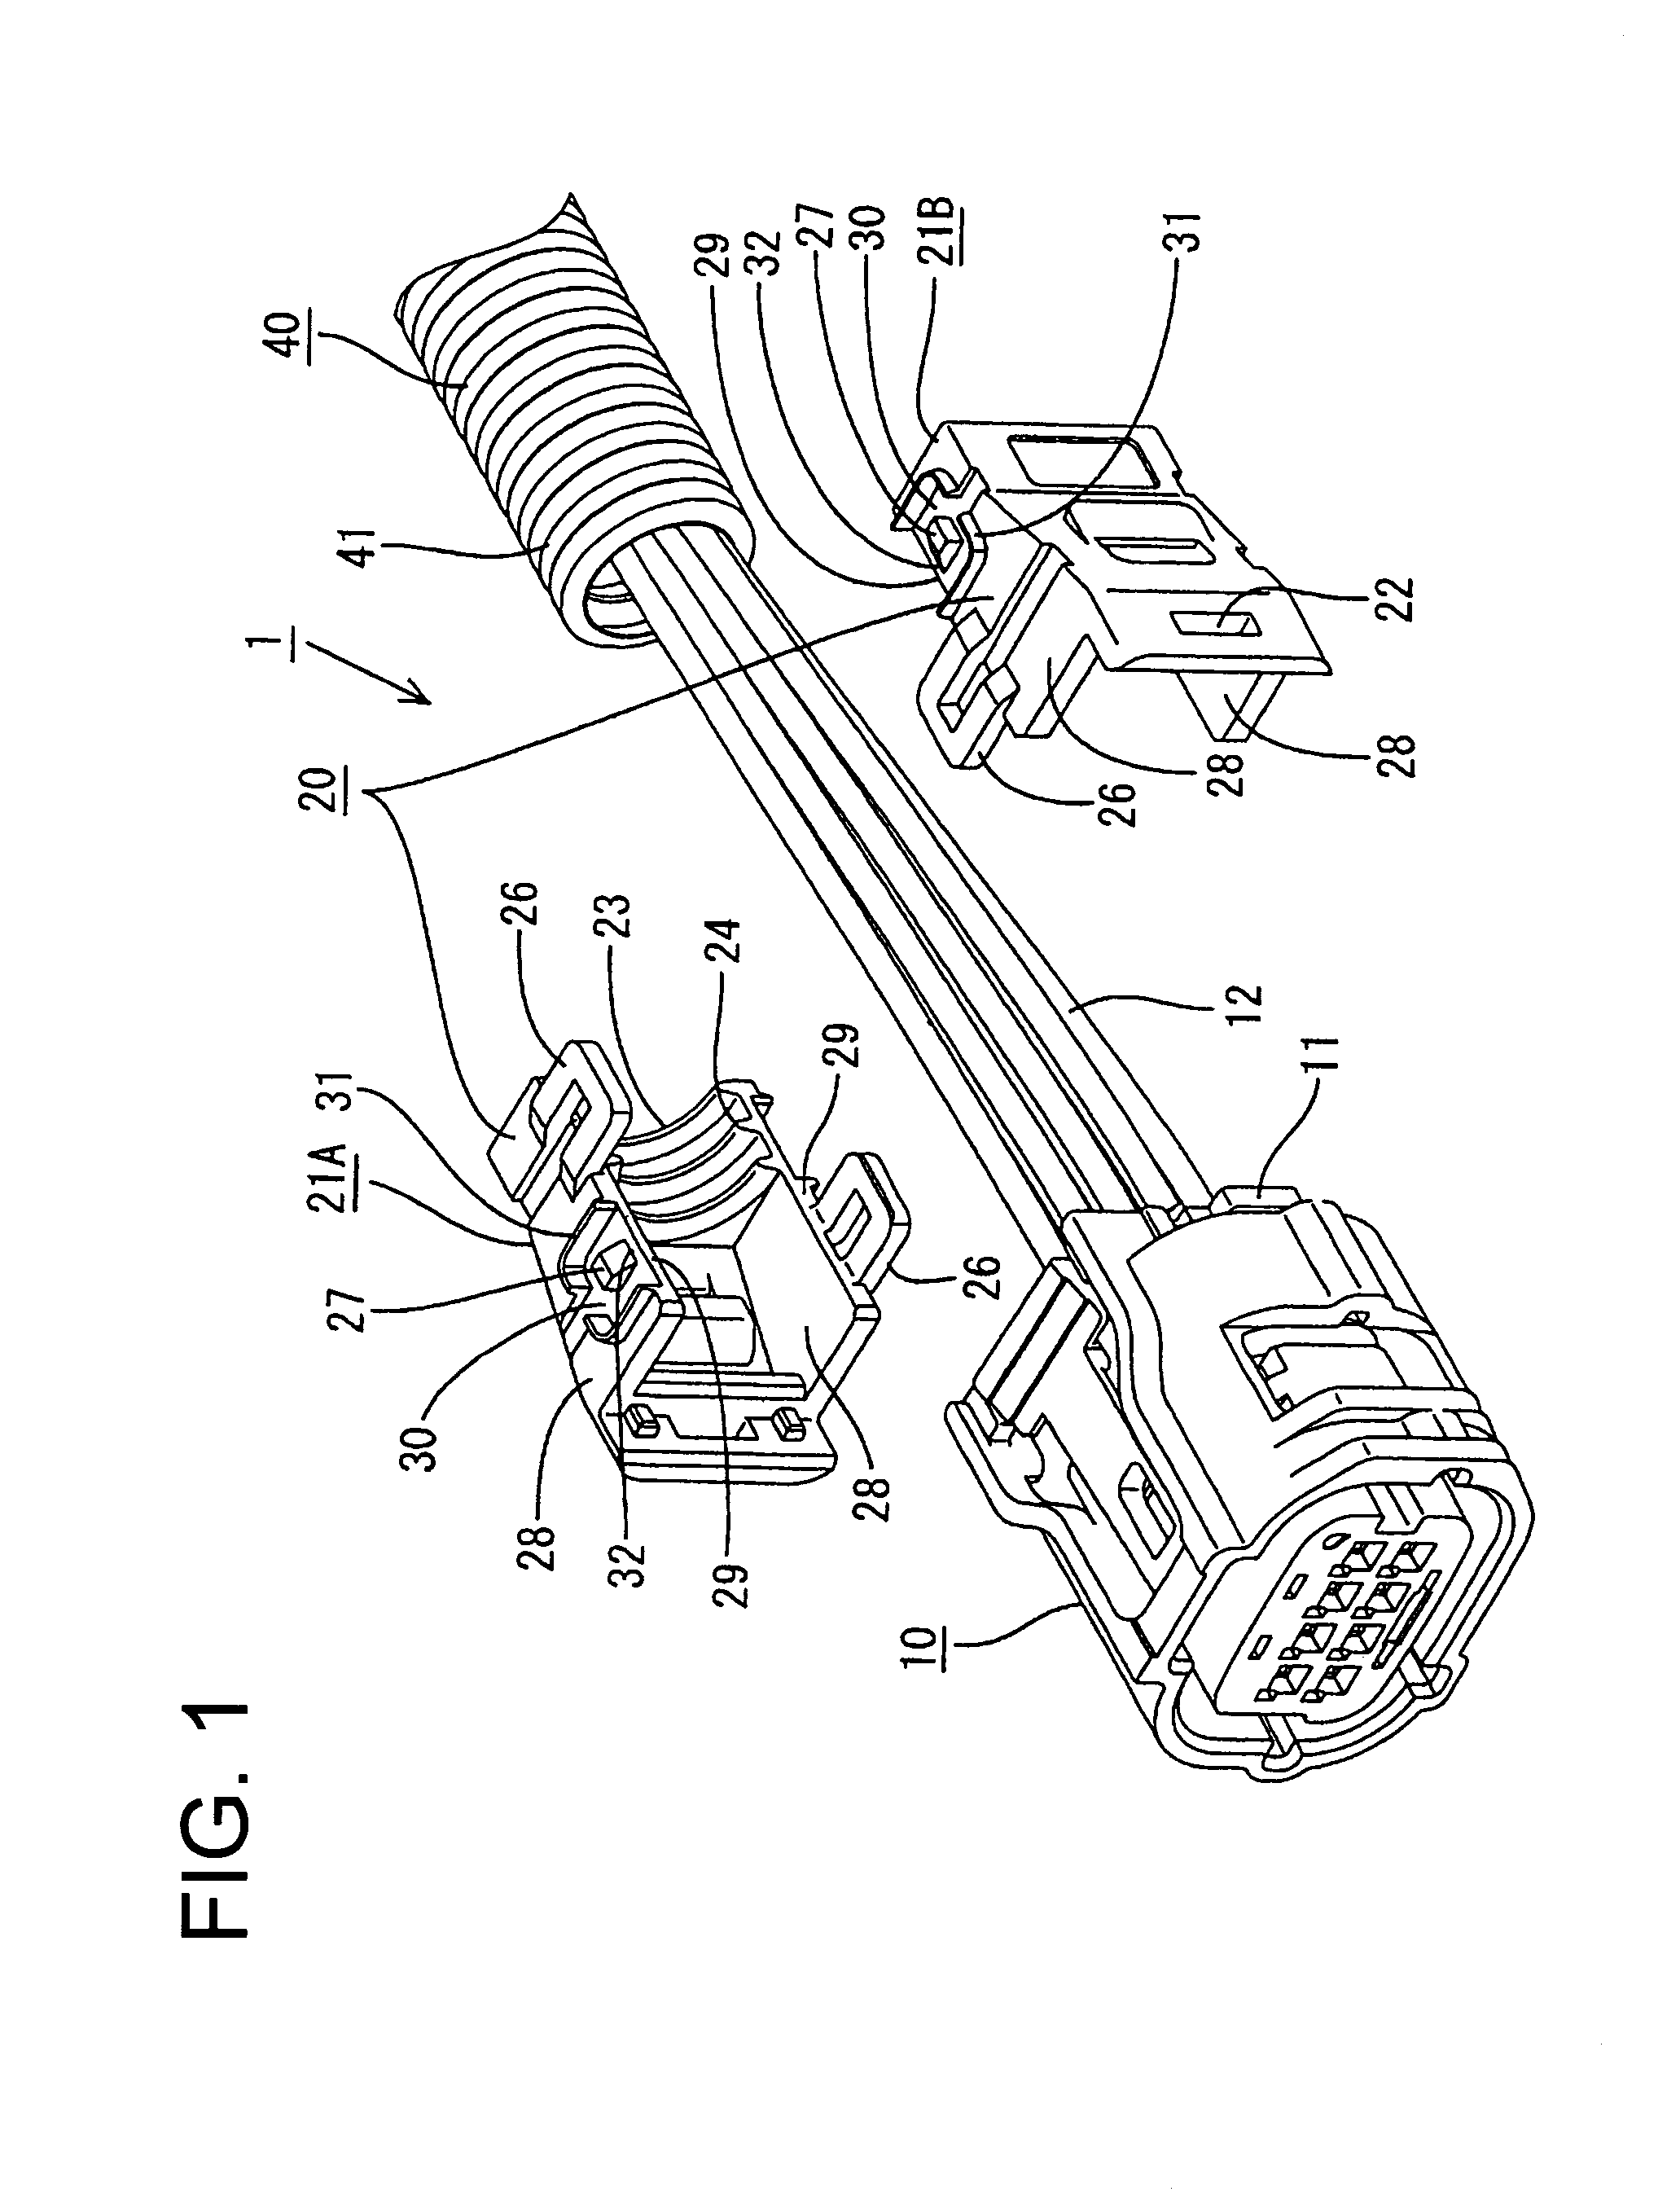 Wire cover with two longitudinal halves connectable around electric wires